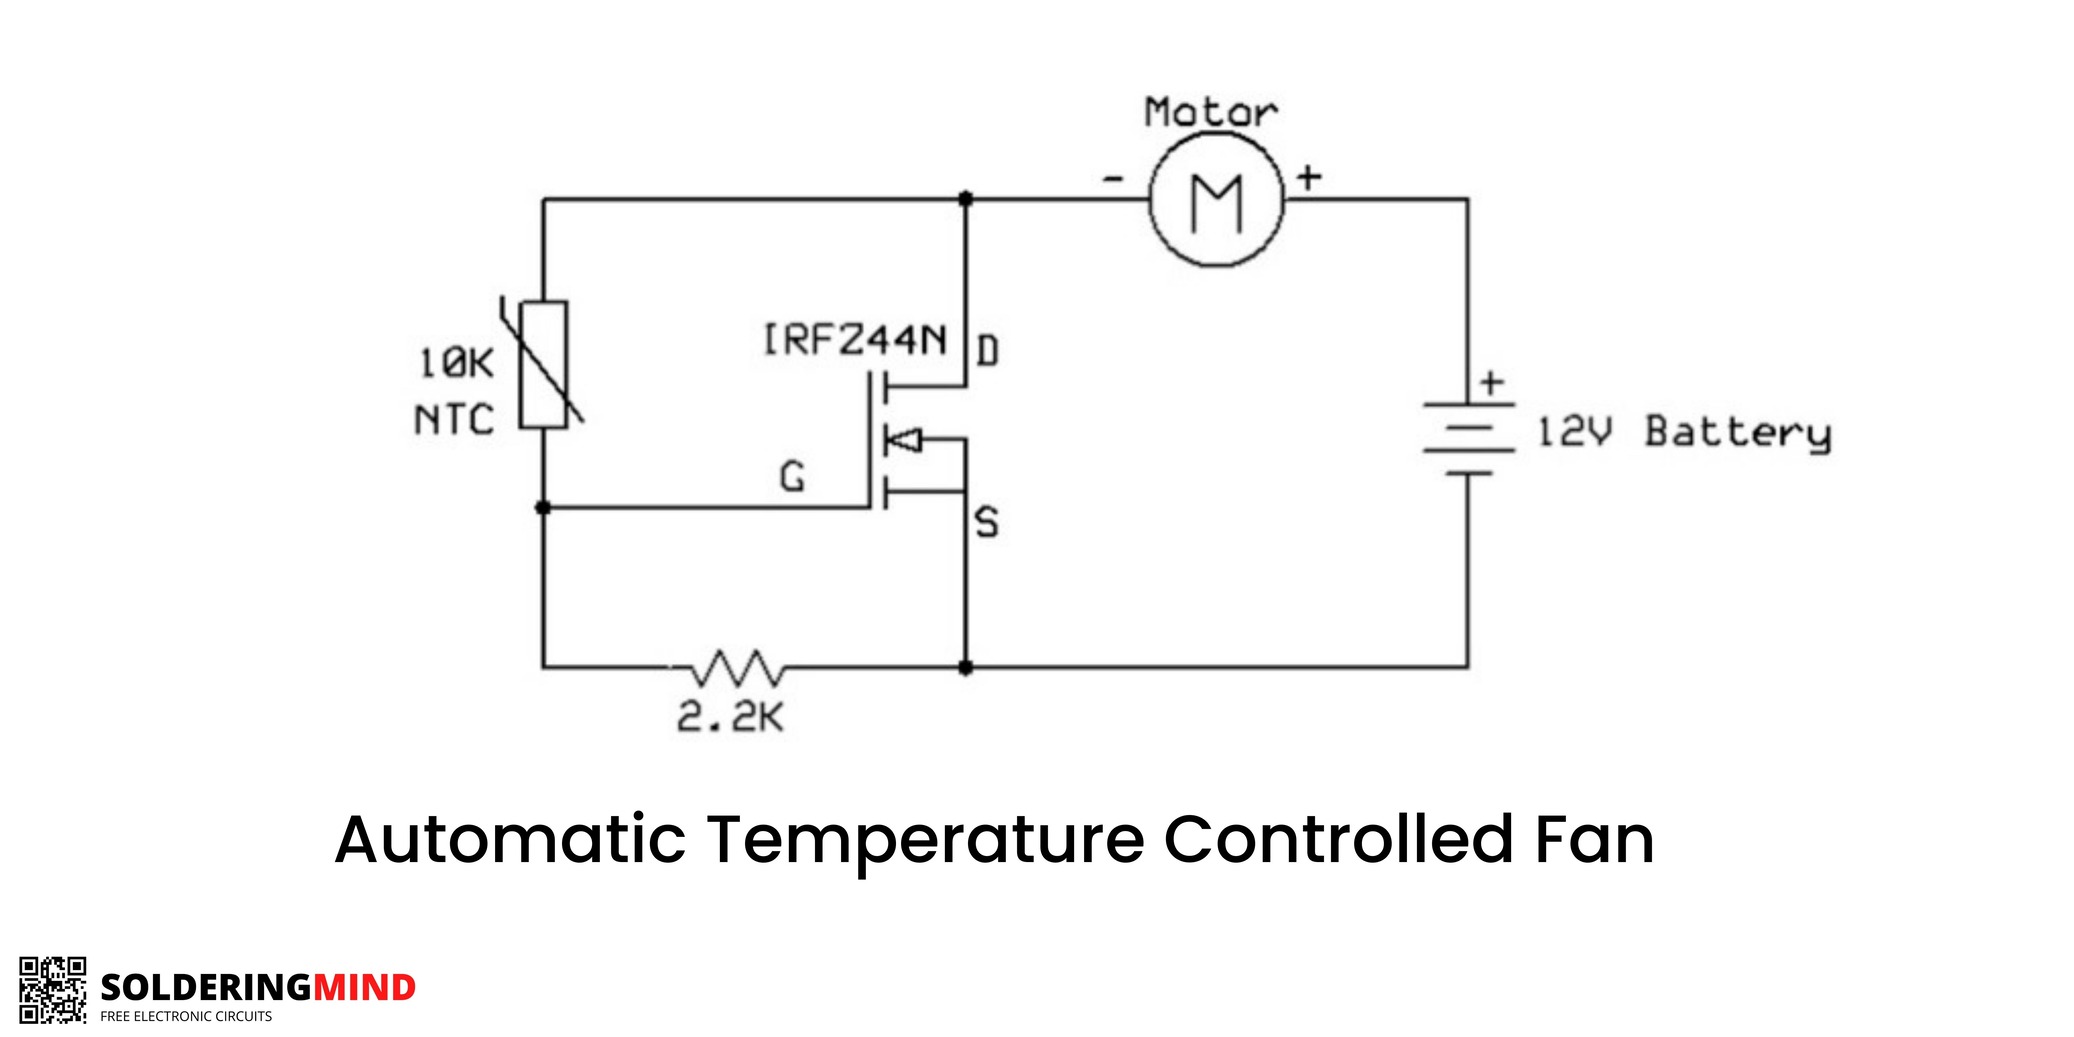 padle Fahrenheit svale Automatic Temperature Controlled Fan using IRFZ 44 Mosfet